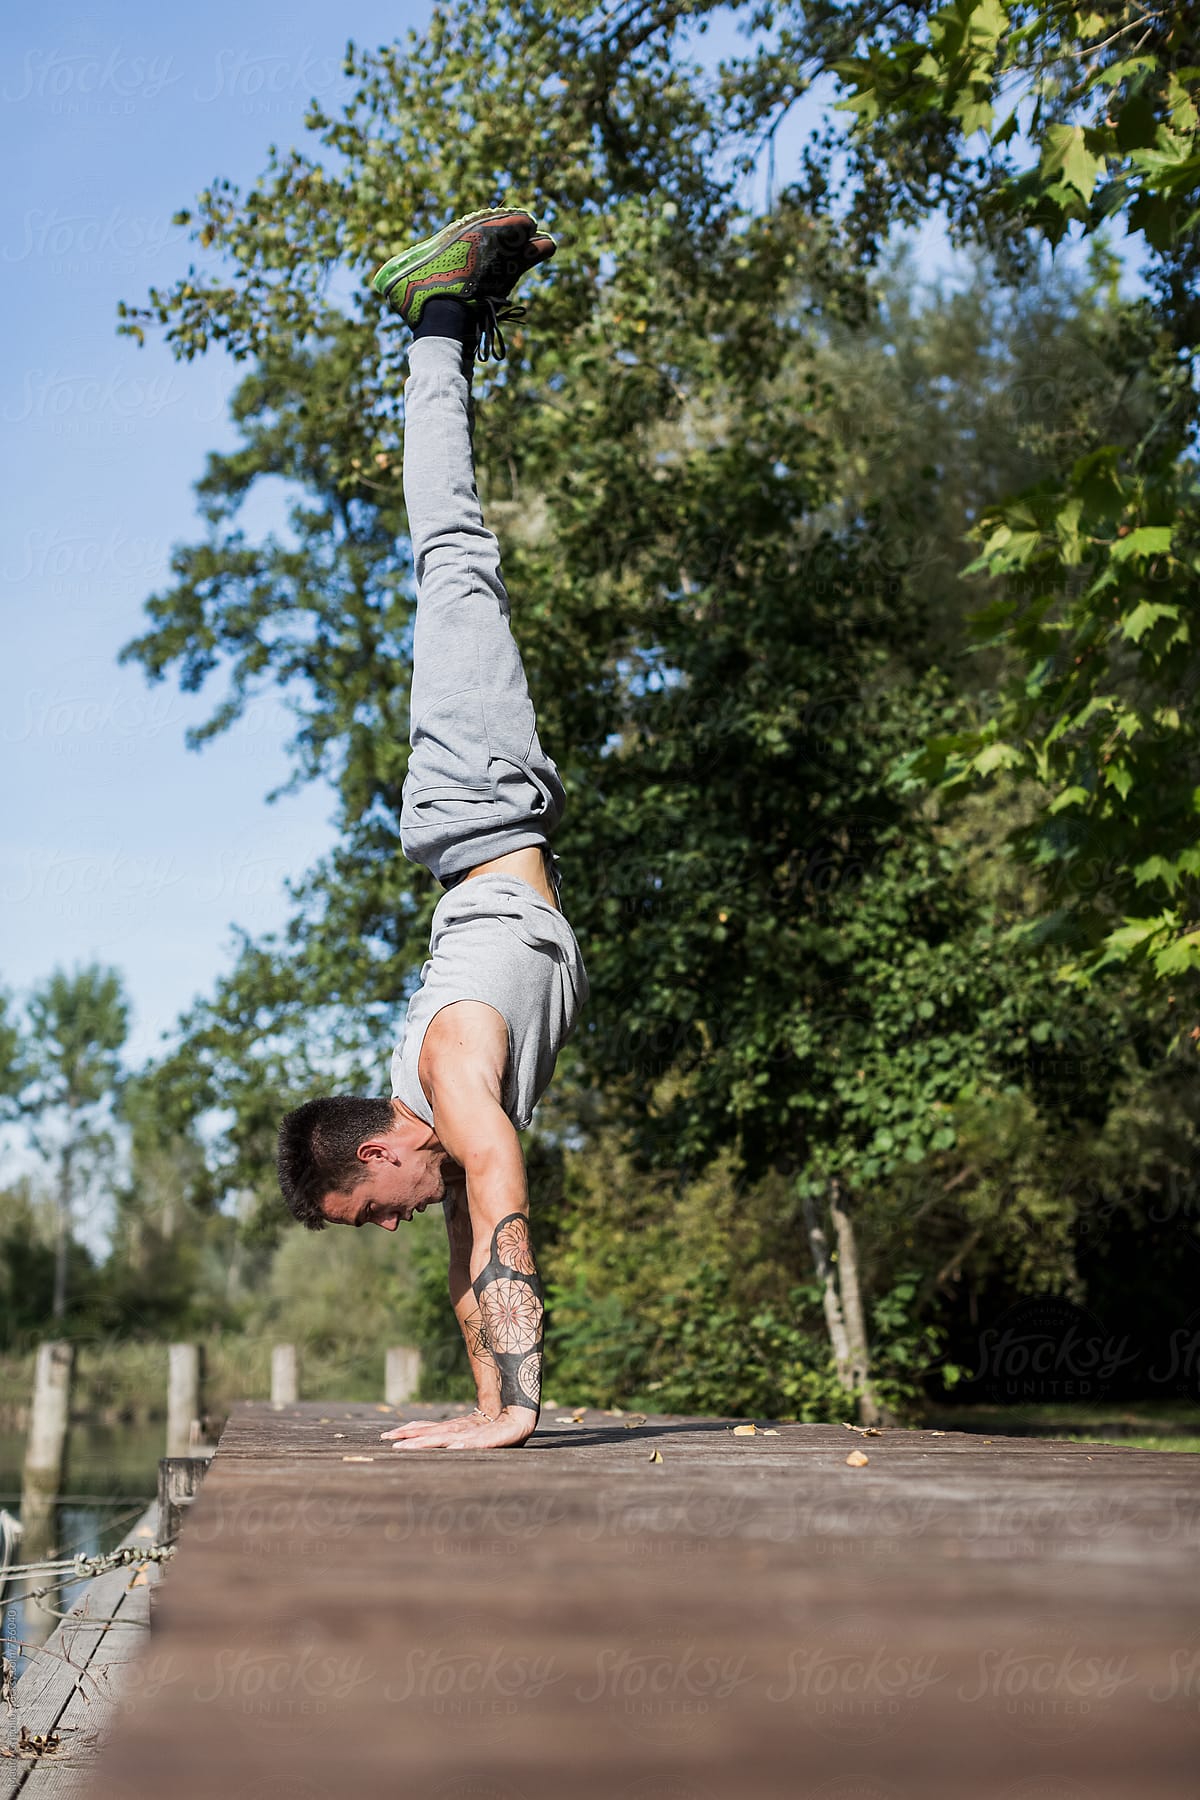 Fit Man doing Handstand pose in a jetty